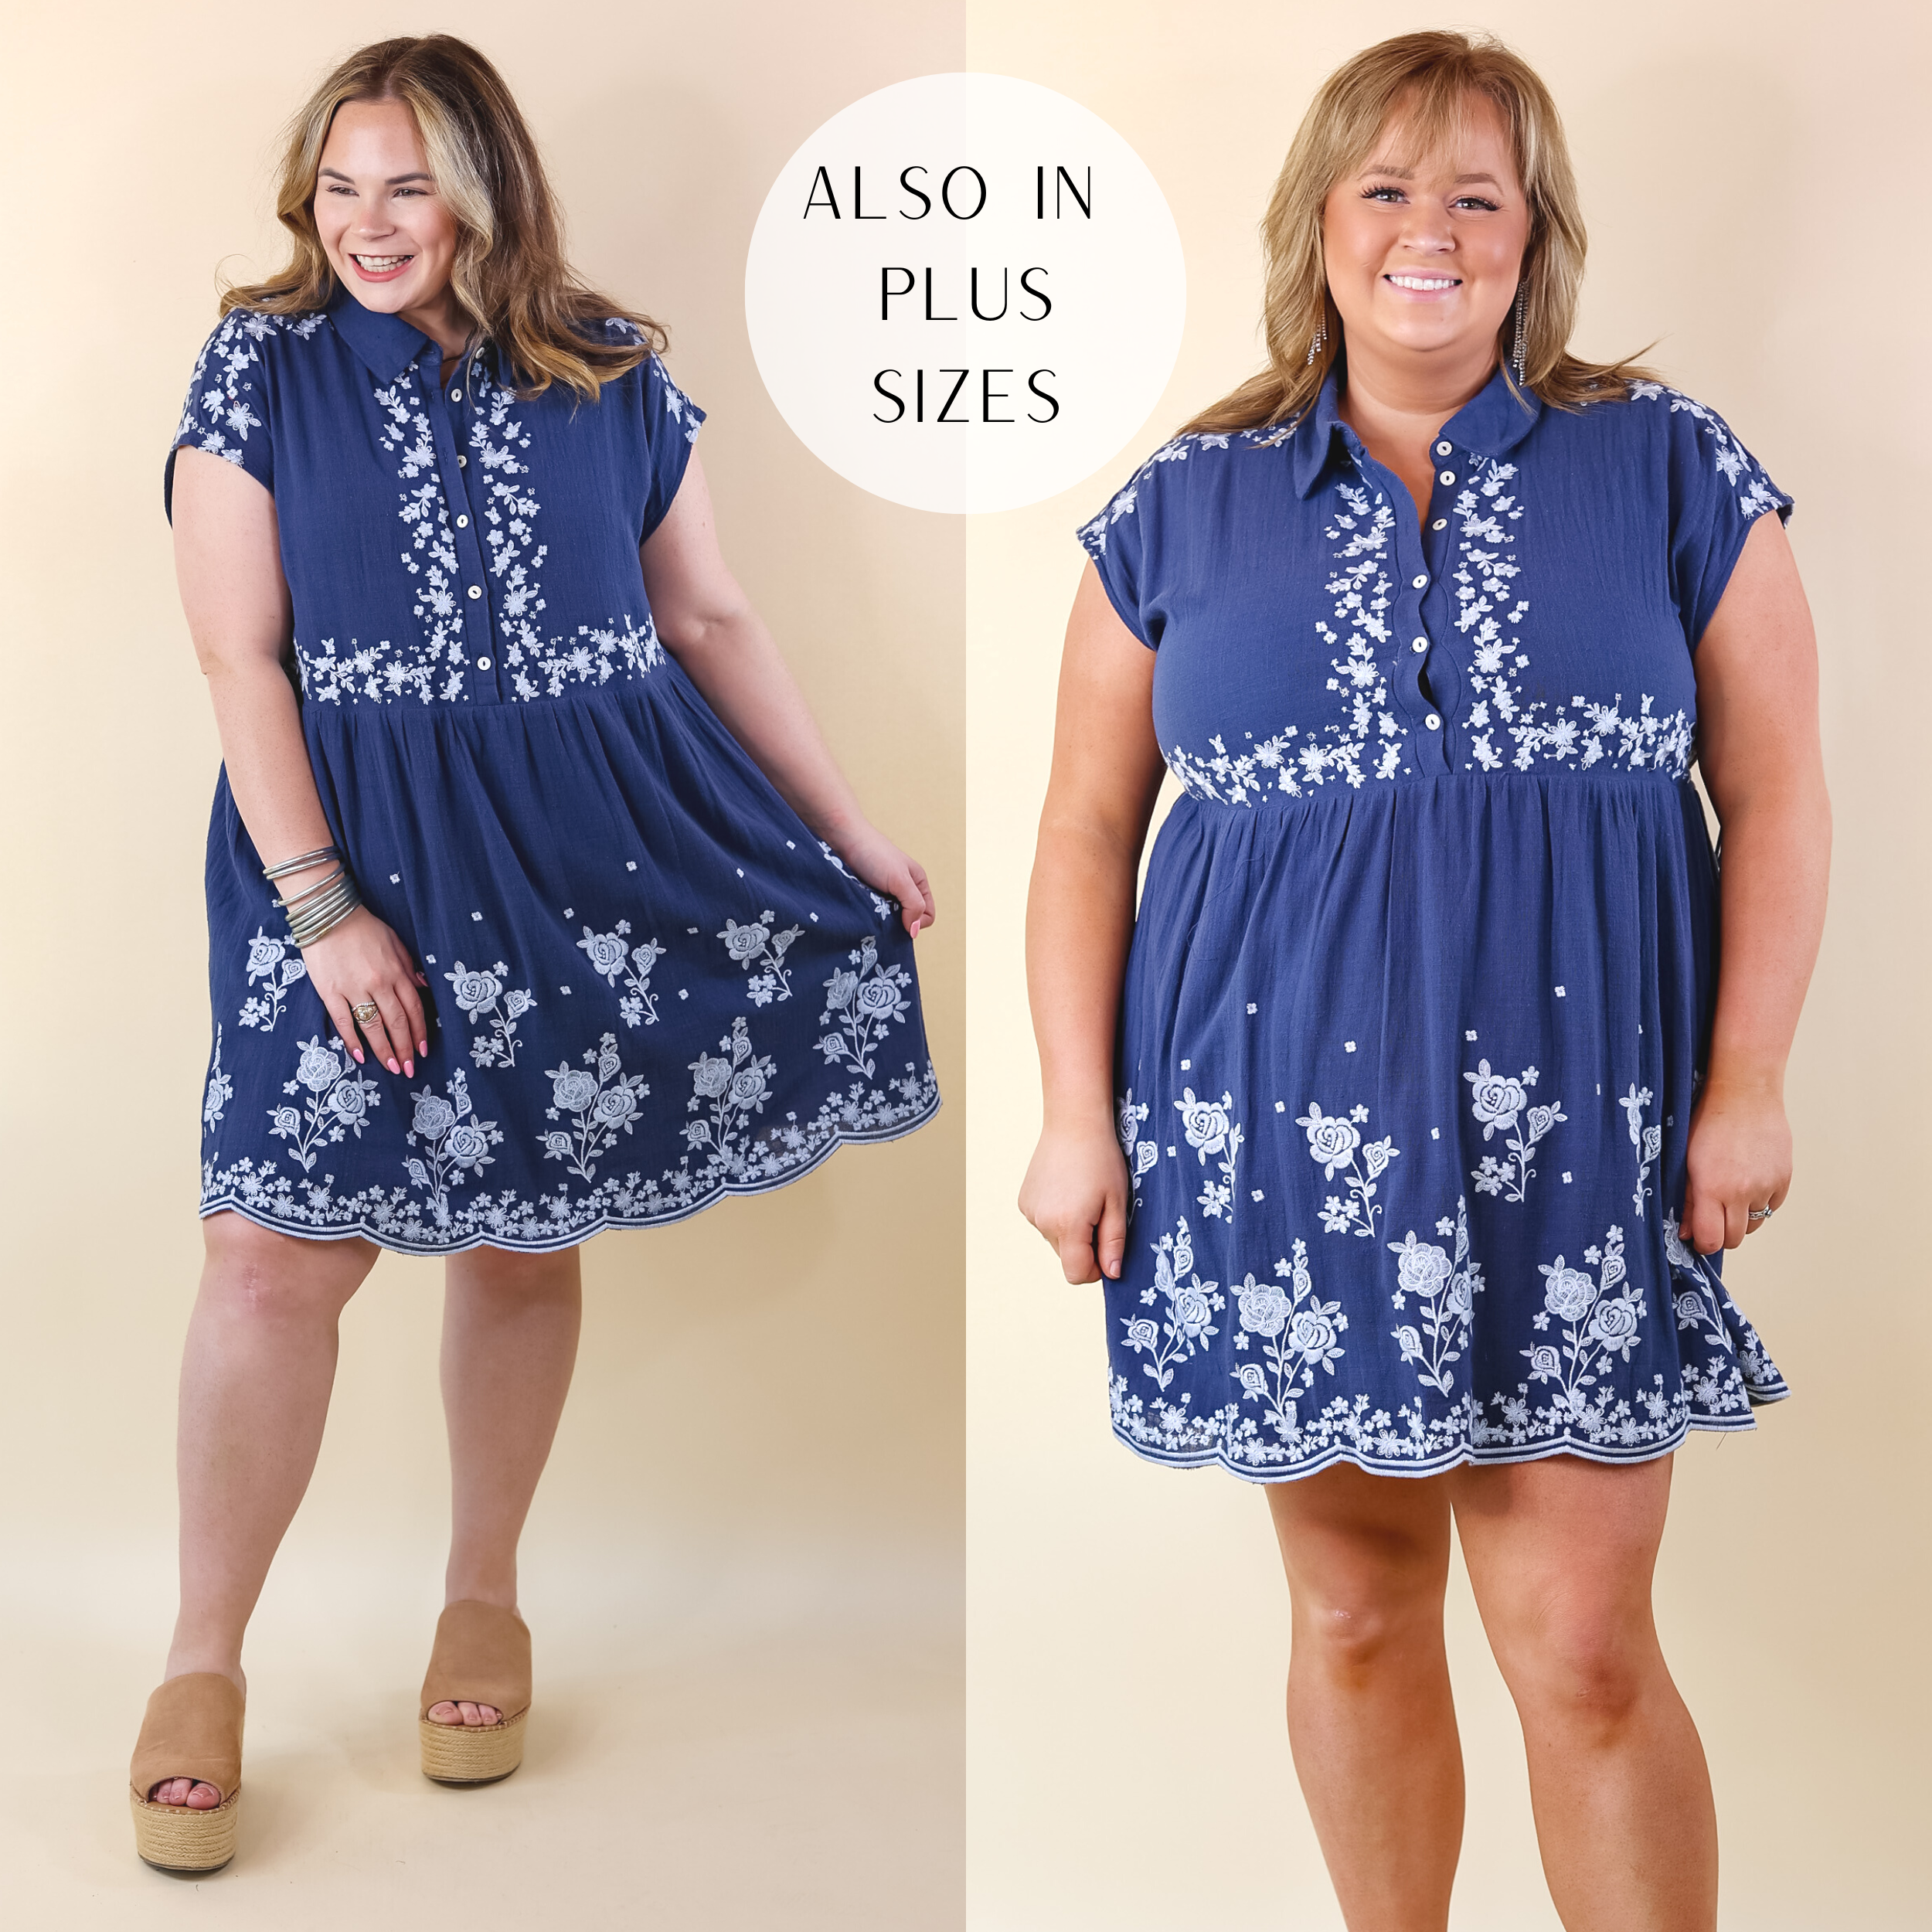 Nautical Blooms Quarter Button and Collar Embroidered Dress with Cap Sleeves in Navy Blue - Giddy Up Glamour Boutique